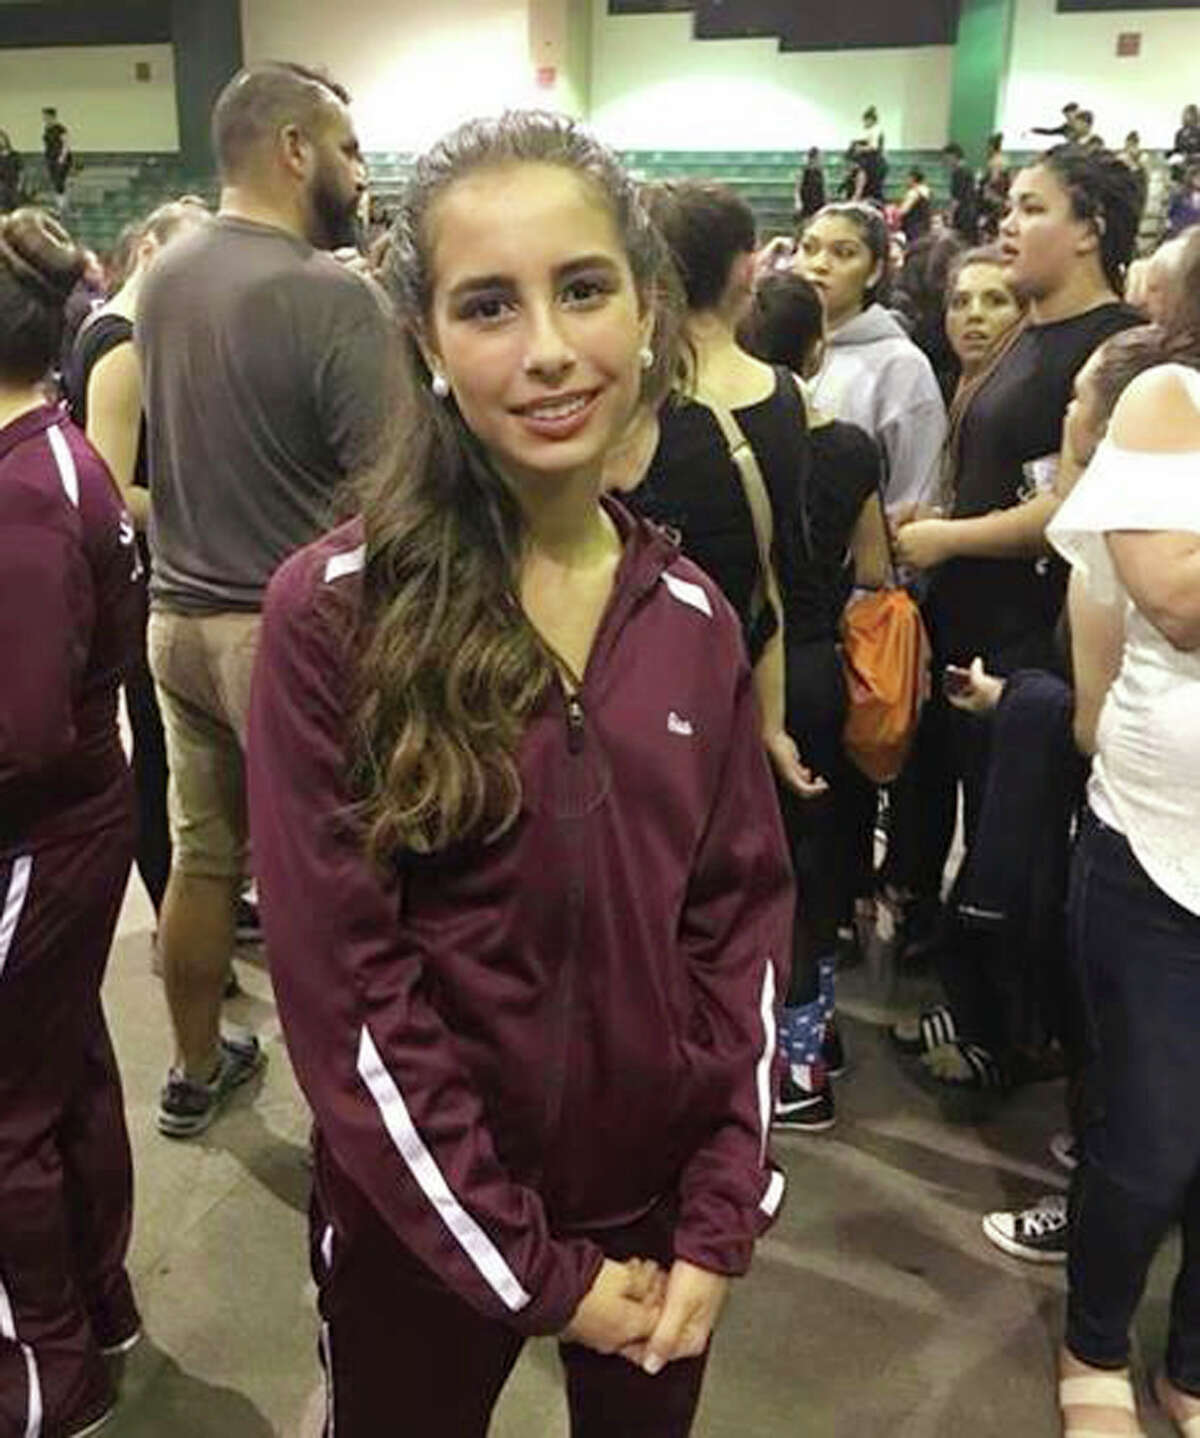 Gina Montalto Shooting victim Gina Montalto was a 14-year-old freshman who participated on the winter color guard squad at the school. Friends and relatives posted tributes on Facebook, including mother Jennifer Montalto. "She was a smart, loving, caring, and strong girl who brightened any room she entered. She will be missed by our family for all eternity," said the post. One of Montalto's color guard instructors from middle school, Manuel Miranda, told the Miami Herald that Montalto was "the sweetest soul ever." "She was kind, caring always smiling and wanting to help," Miranda said.